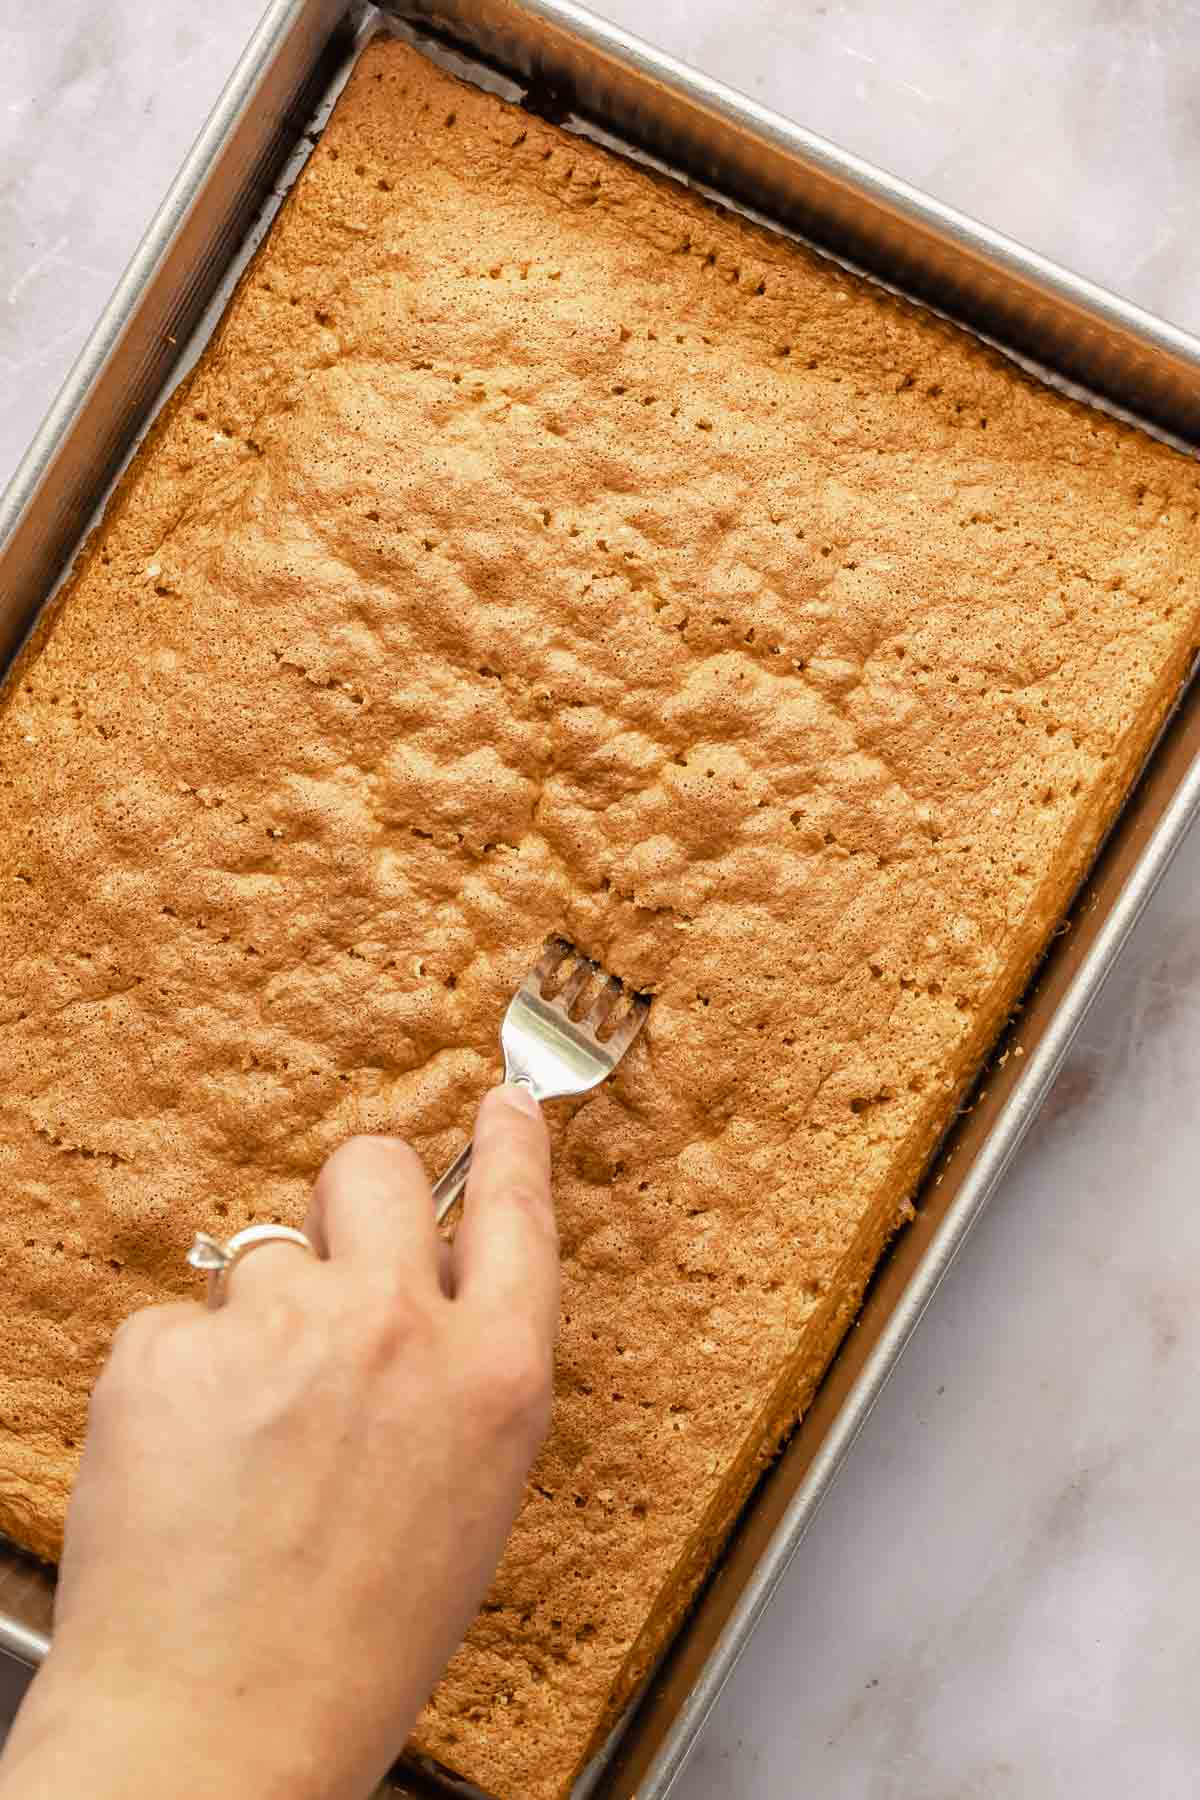 A fork pricks holes into the baked sponge cake all over.